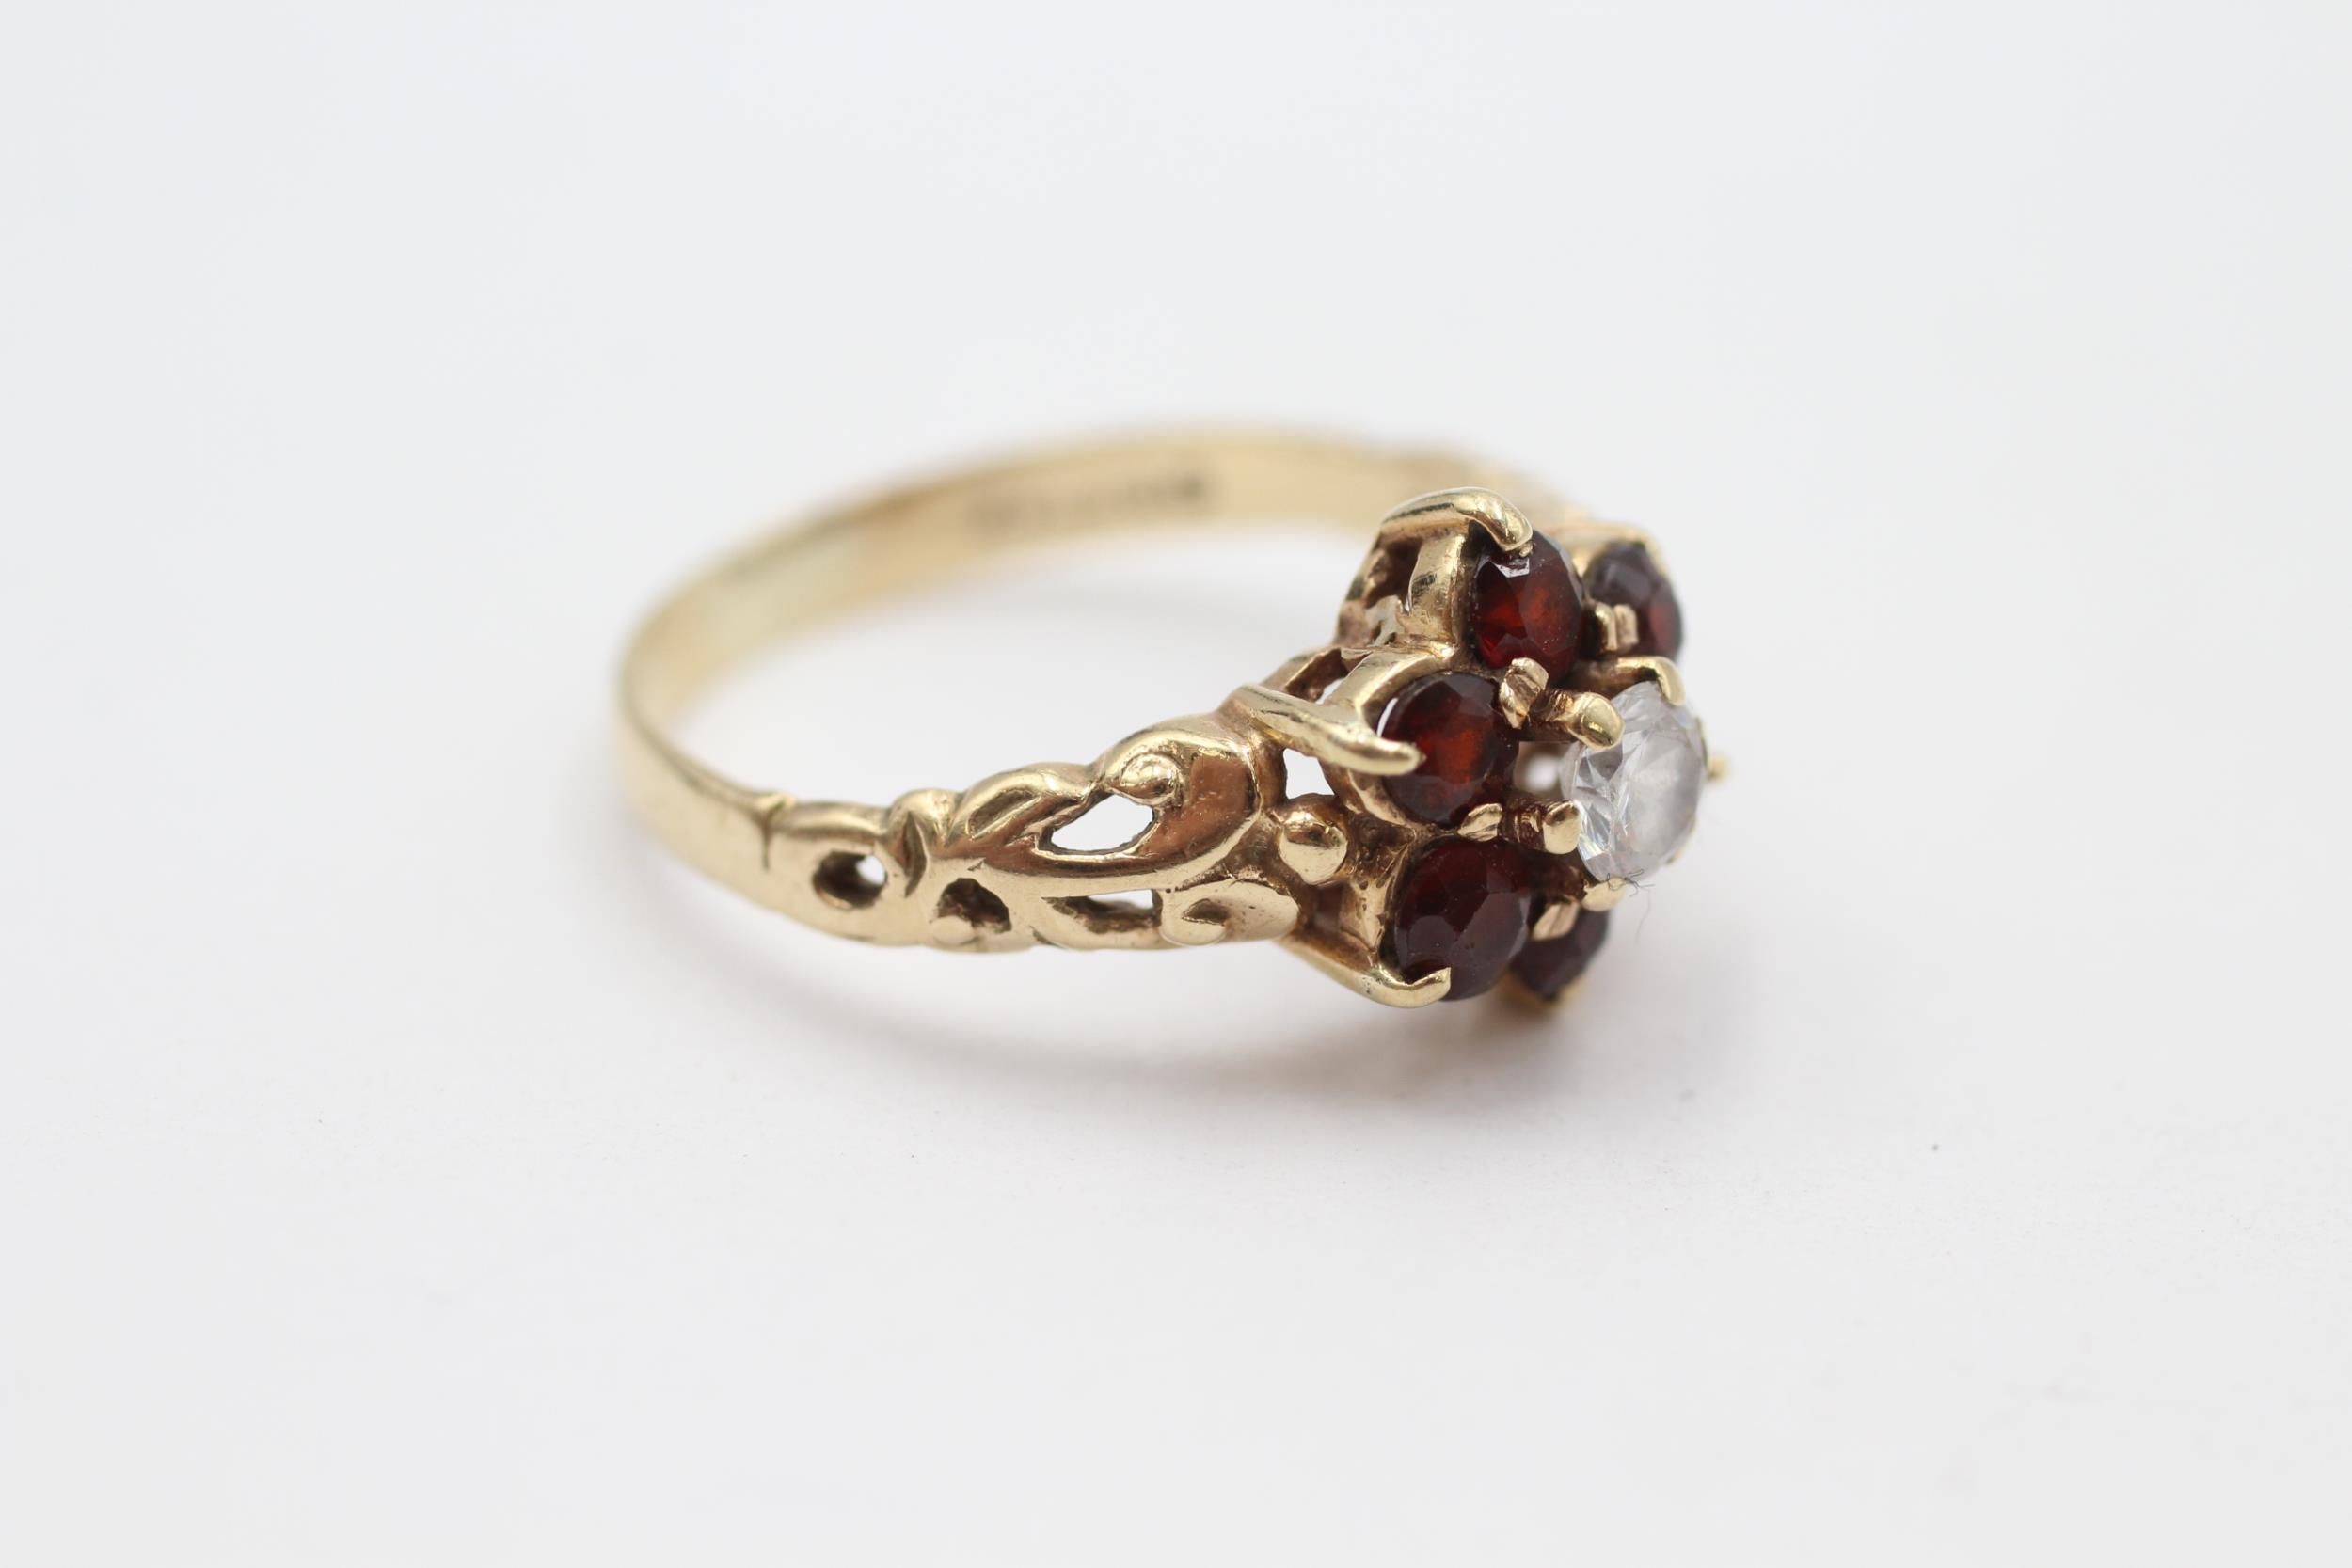 9ct gold 1970's garnet & cubic zirconia cluster ring Size N - 2.6 g - Image 2 of 5